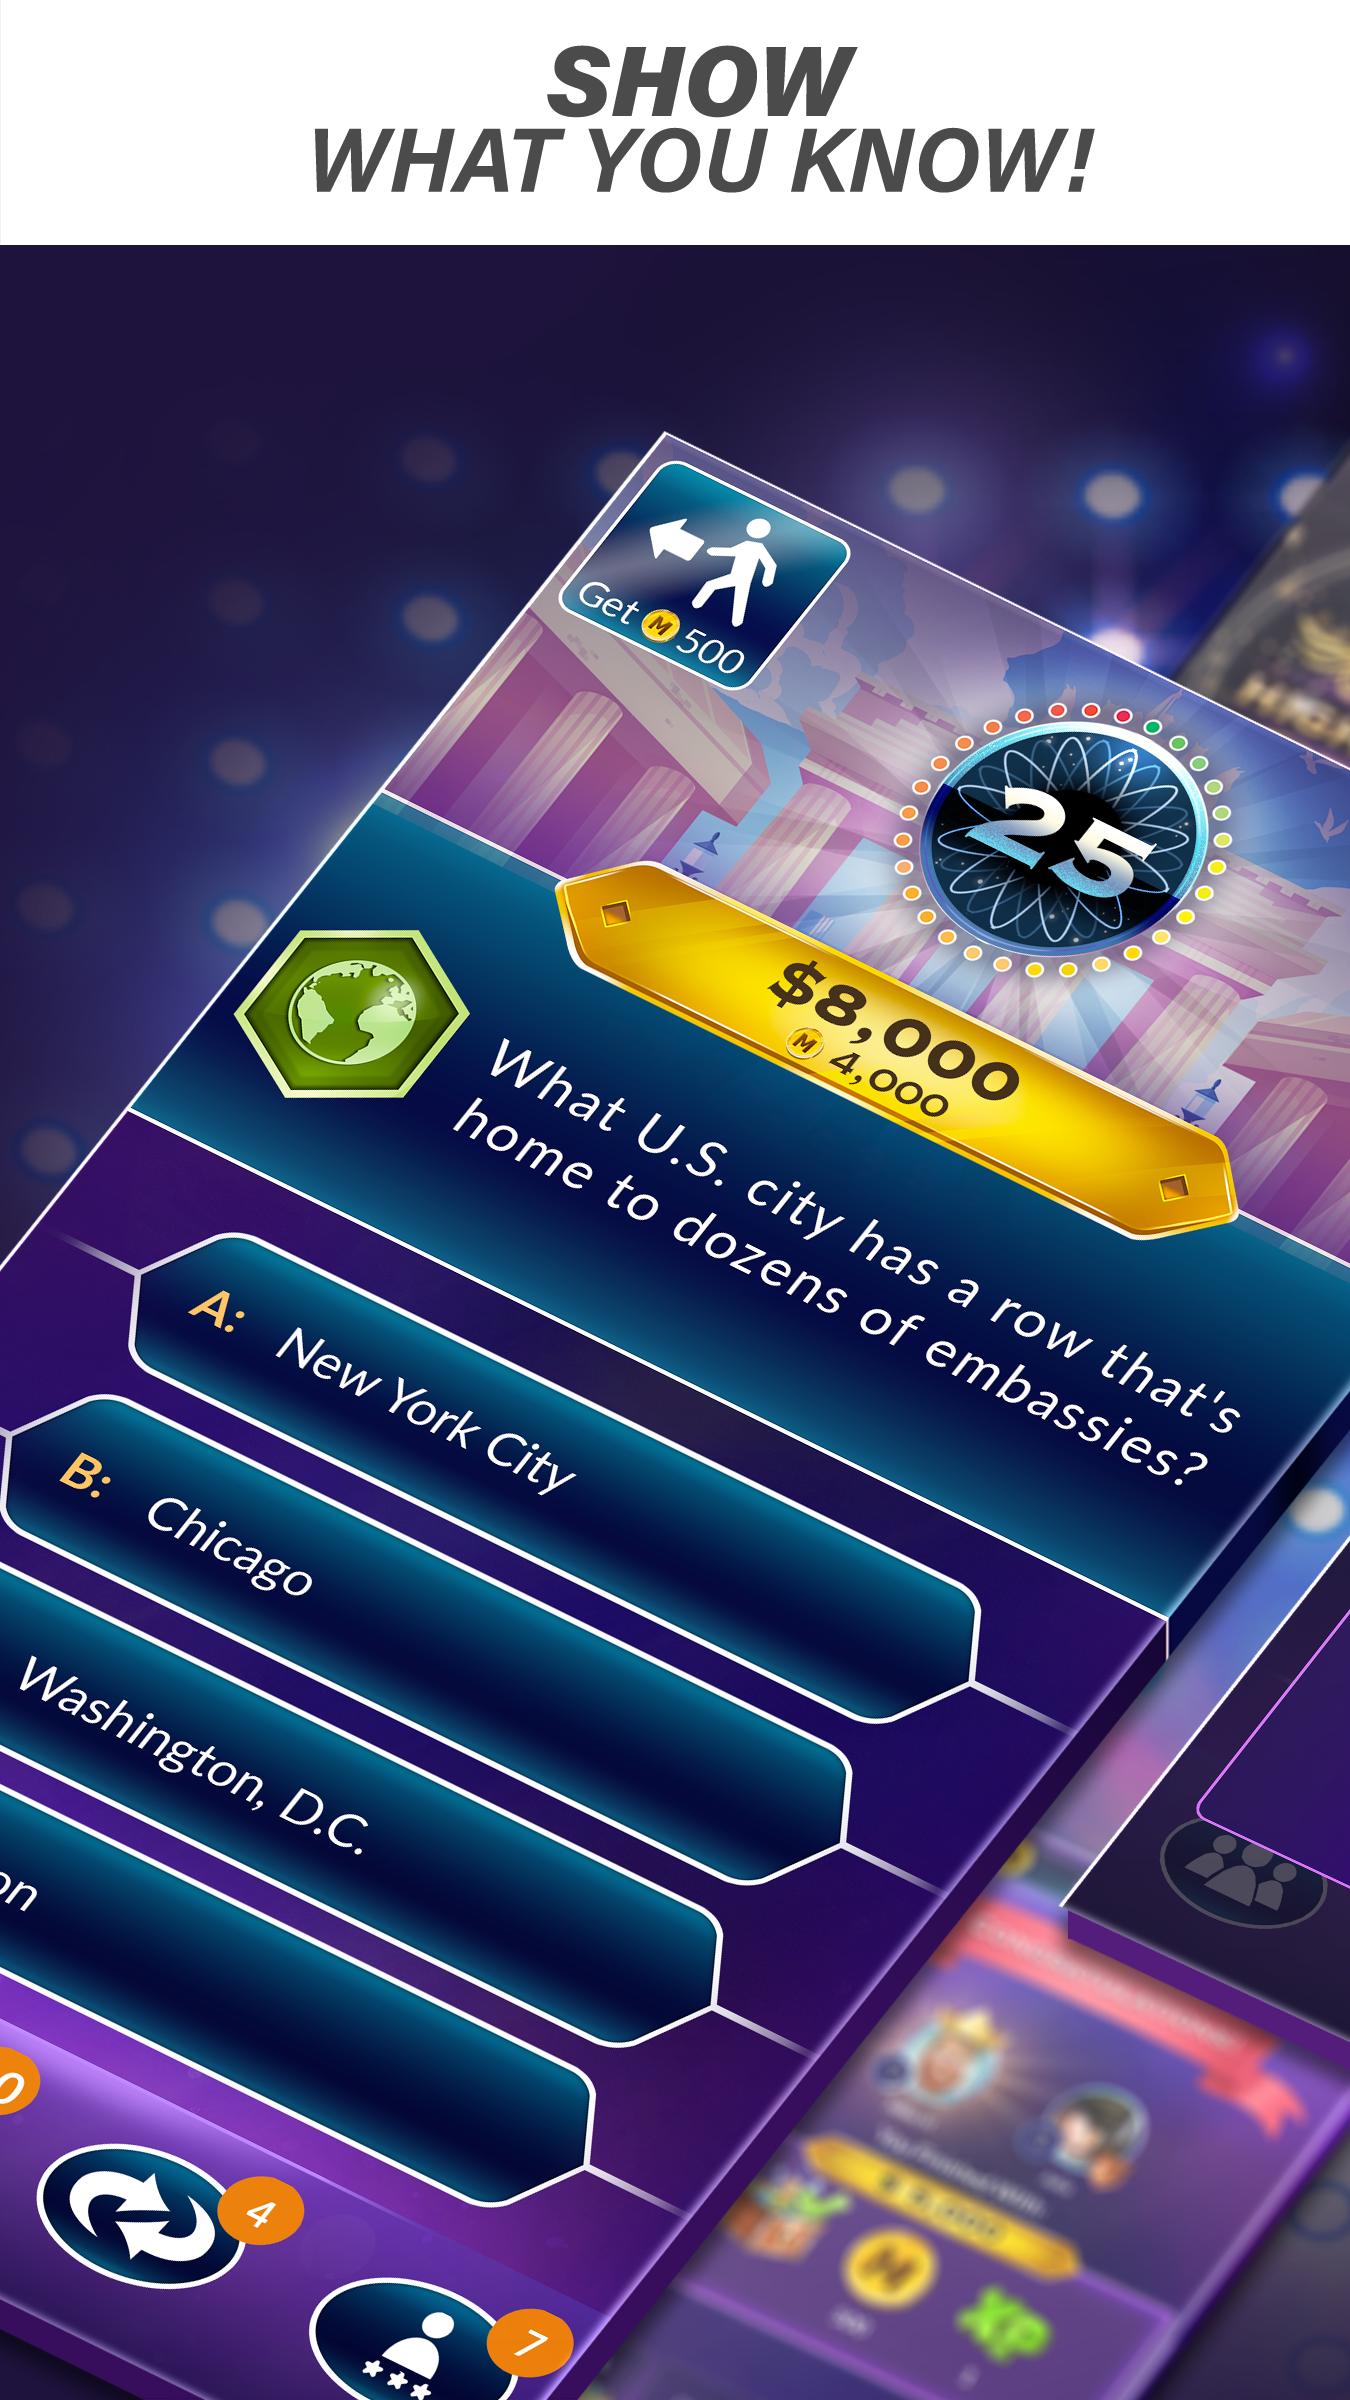 Who Wants to Be a Millionaire? Trivia & Quiz Game 37.0.0 Screenshot 13